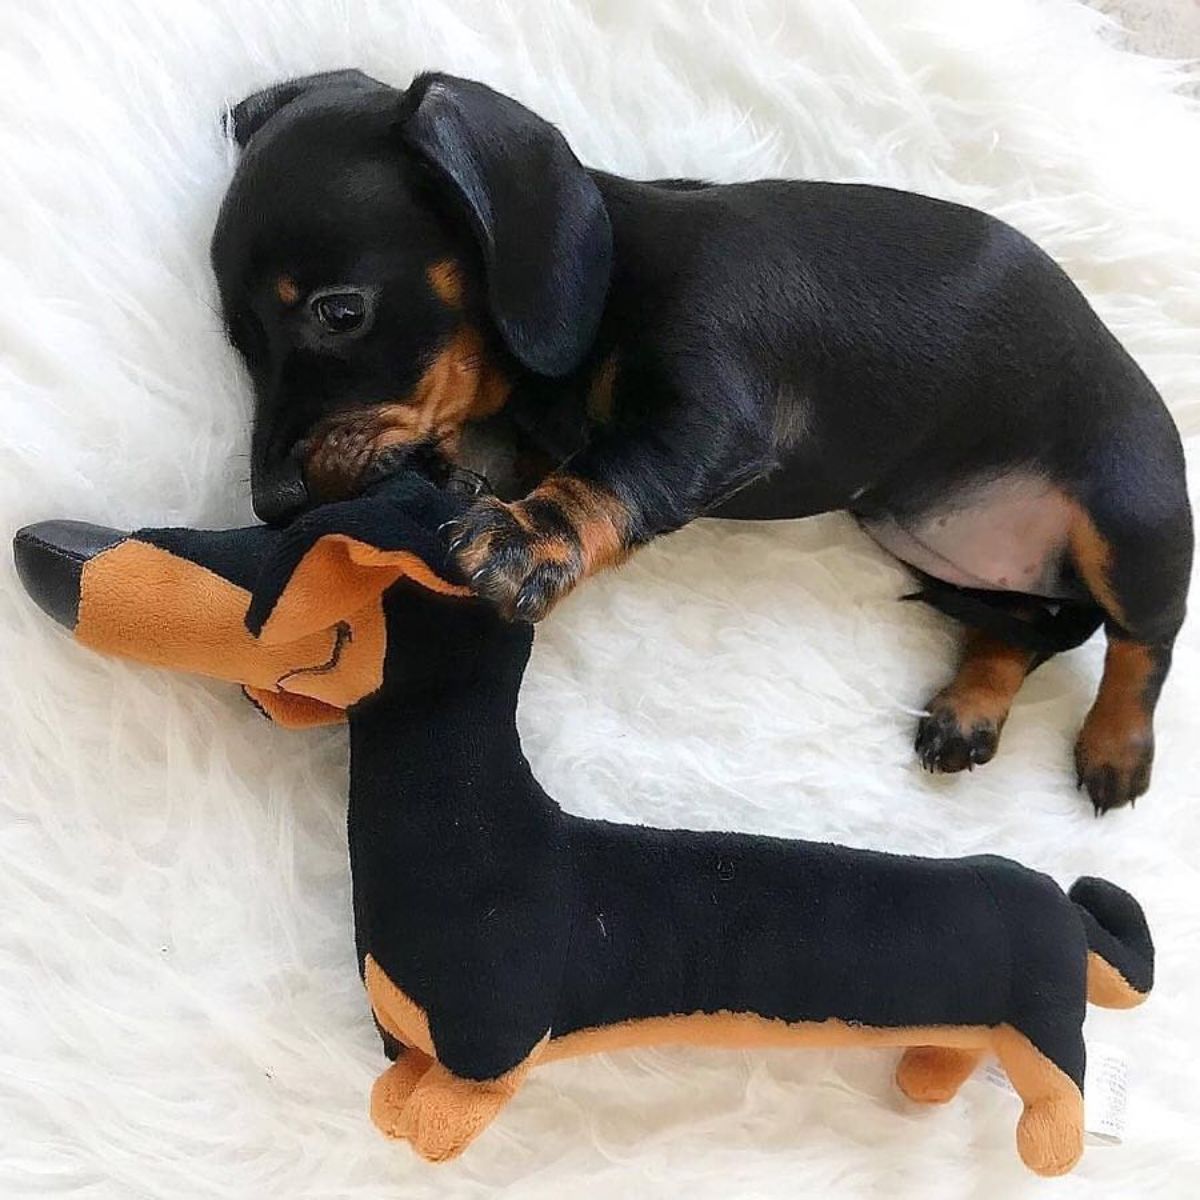 black dachshund puppy with a dachshund stuffed toy lying on a white bed